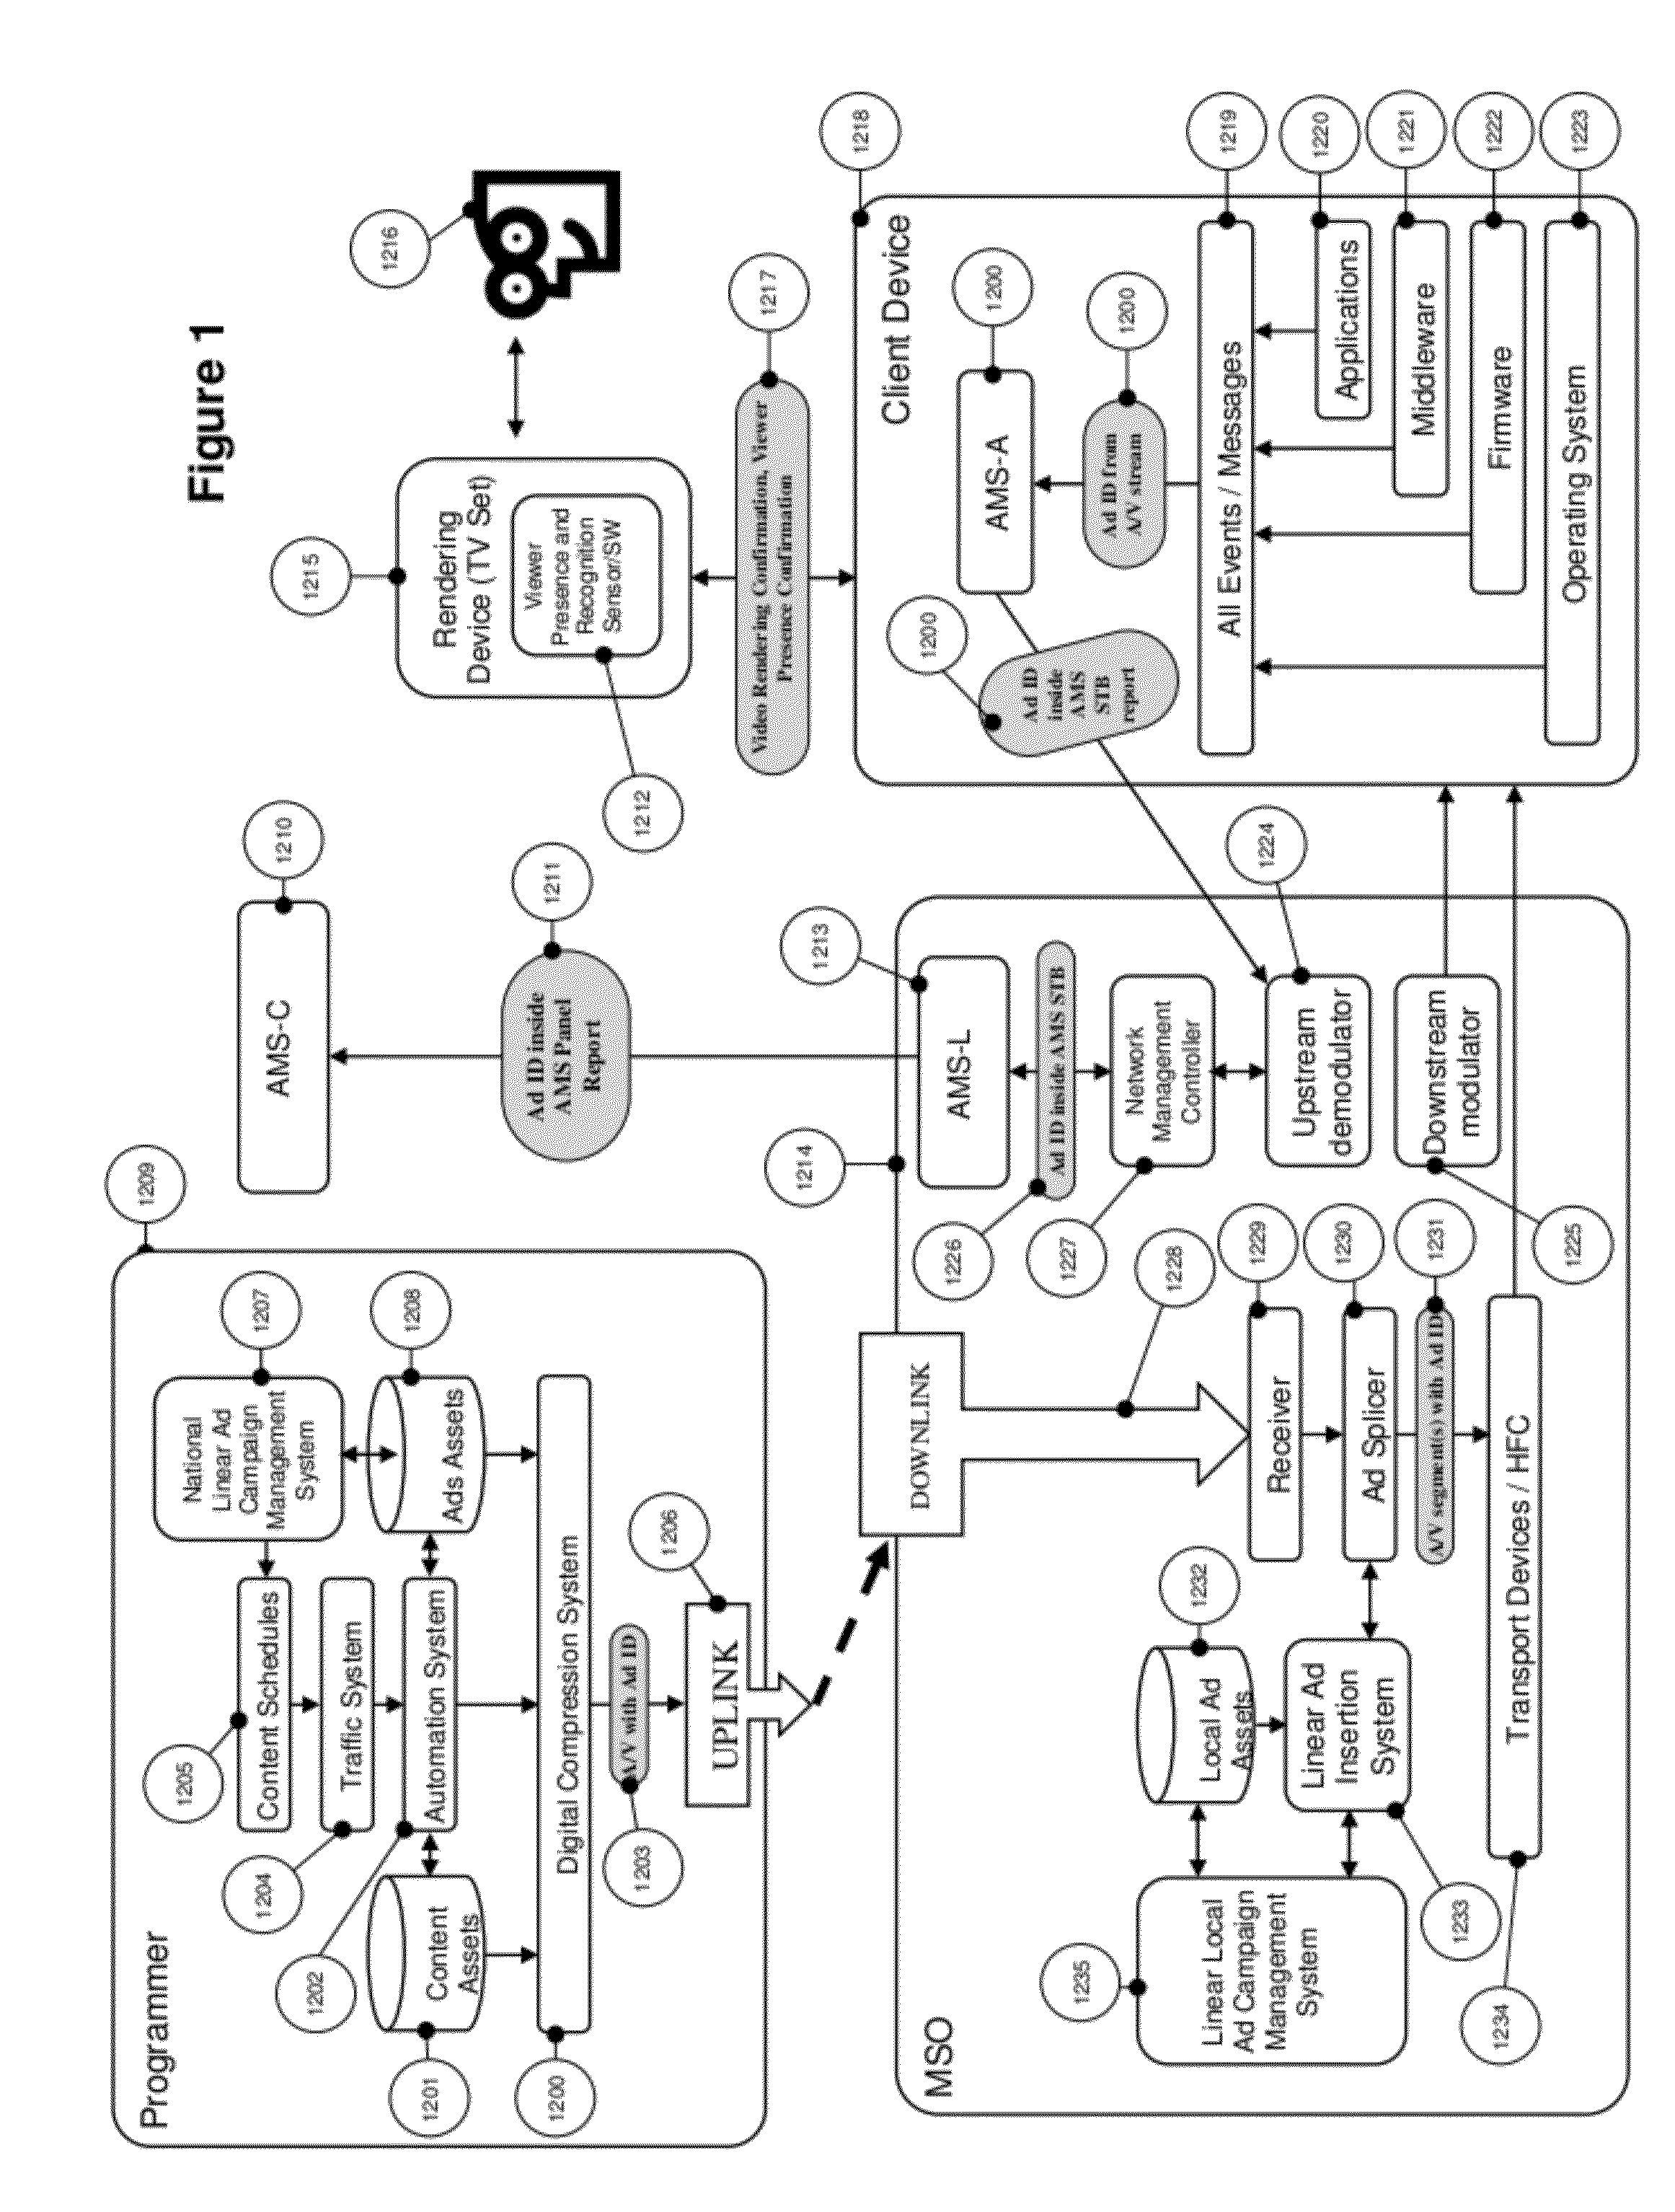 System and method for scalable, high accuracy, sensor and id based audience measurement system based on distributed computing architecture